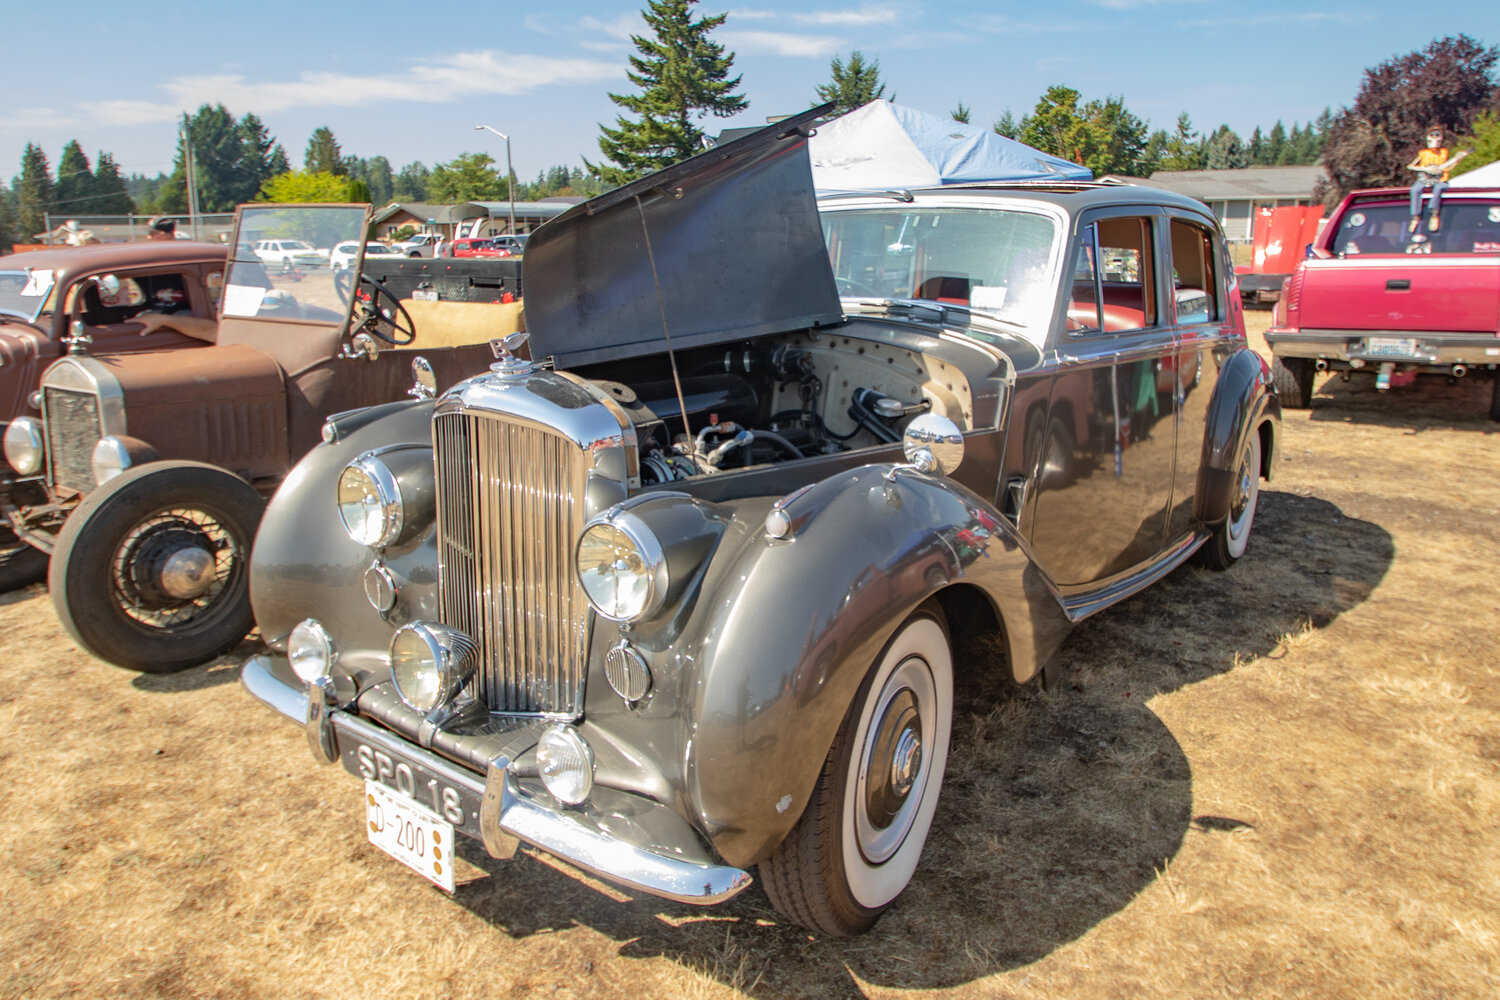 A 1954 Bentley R-Type four-door coupe sits on display on Saturday, Sept. 2, at Wilkowski Park in Rainier for the 16th annual Military Heroes Car Show.